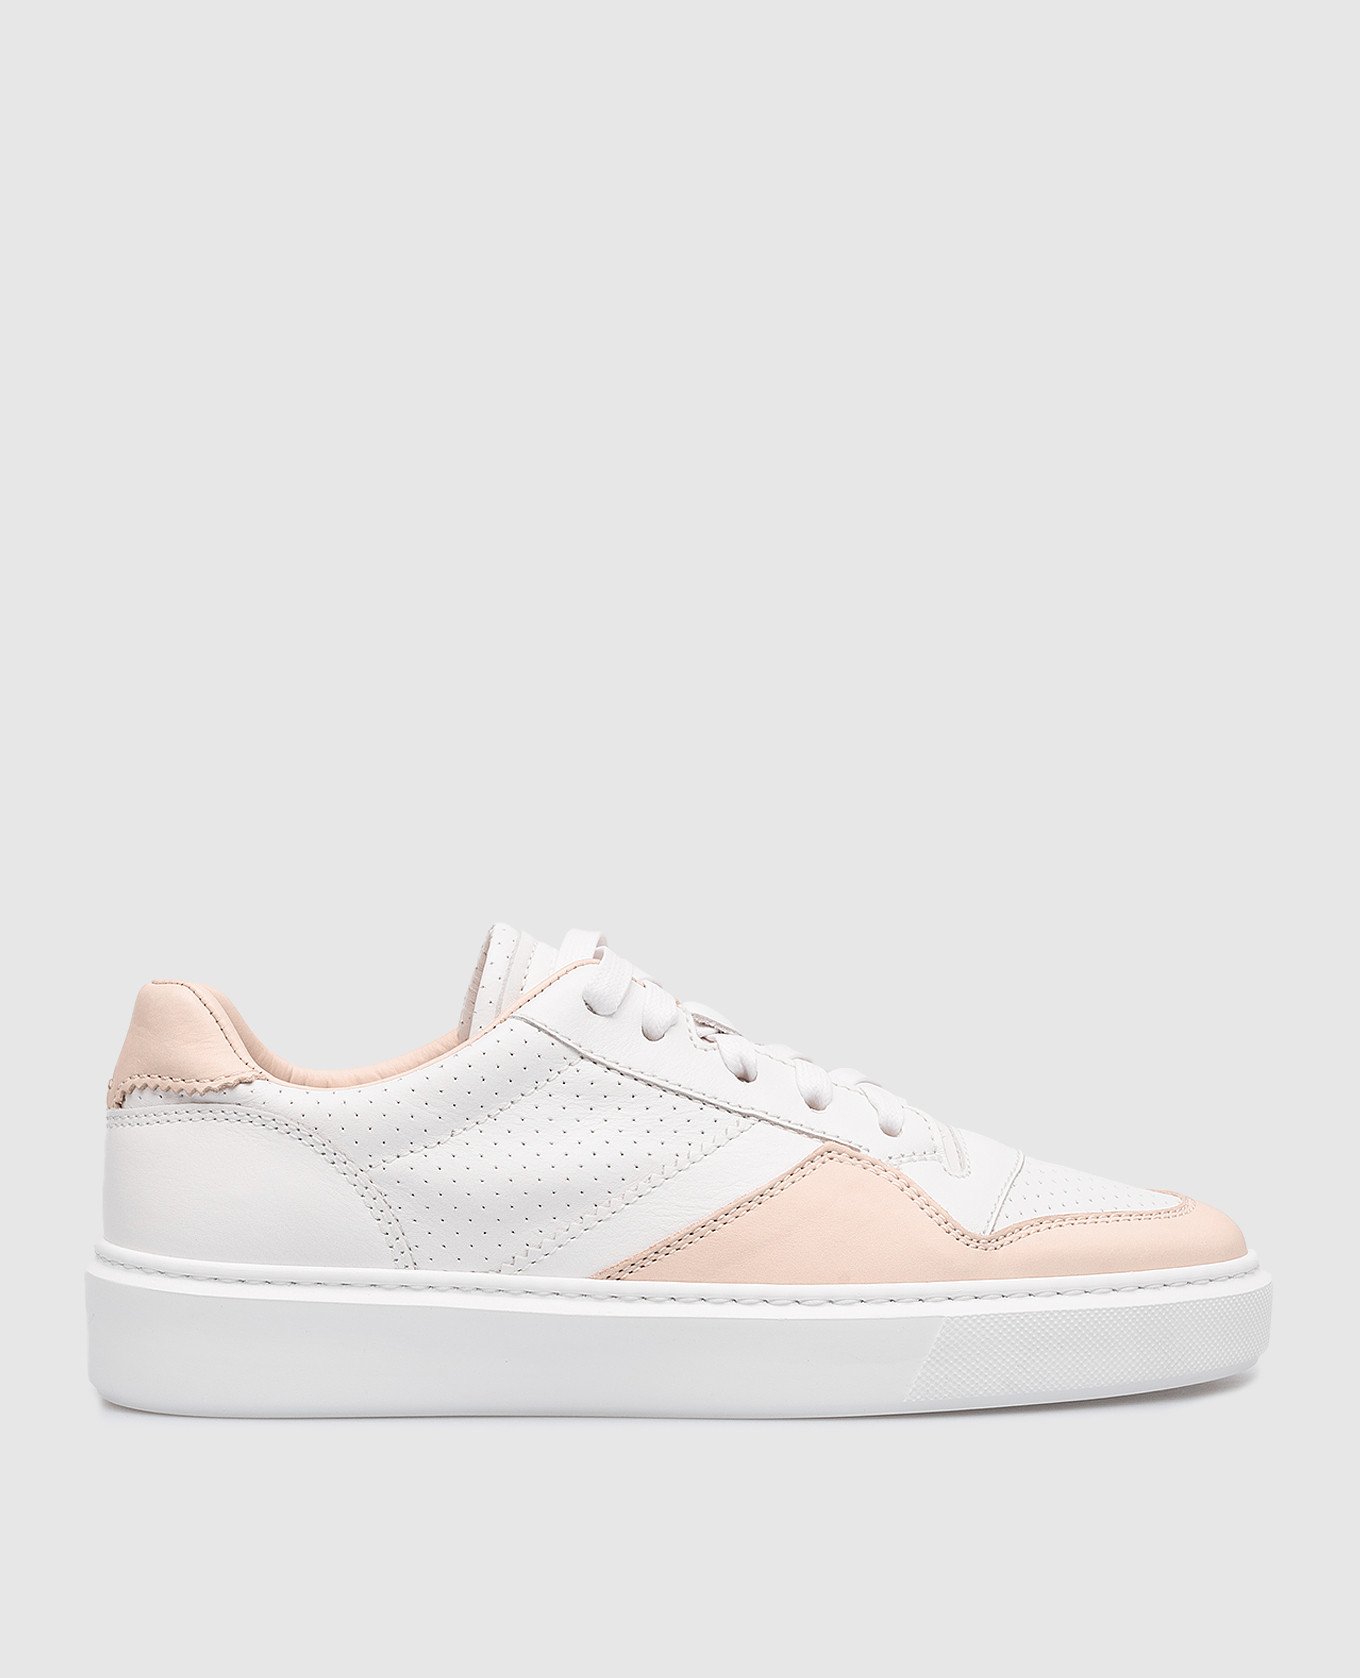 White leather sneakers with perforations